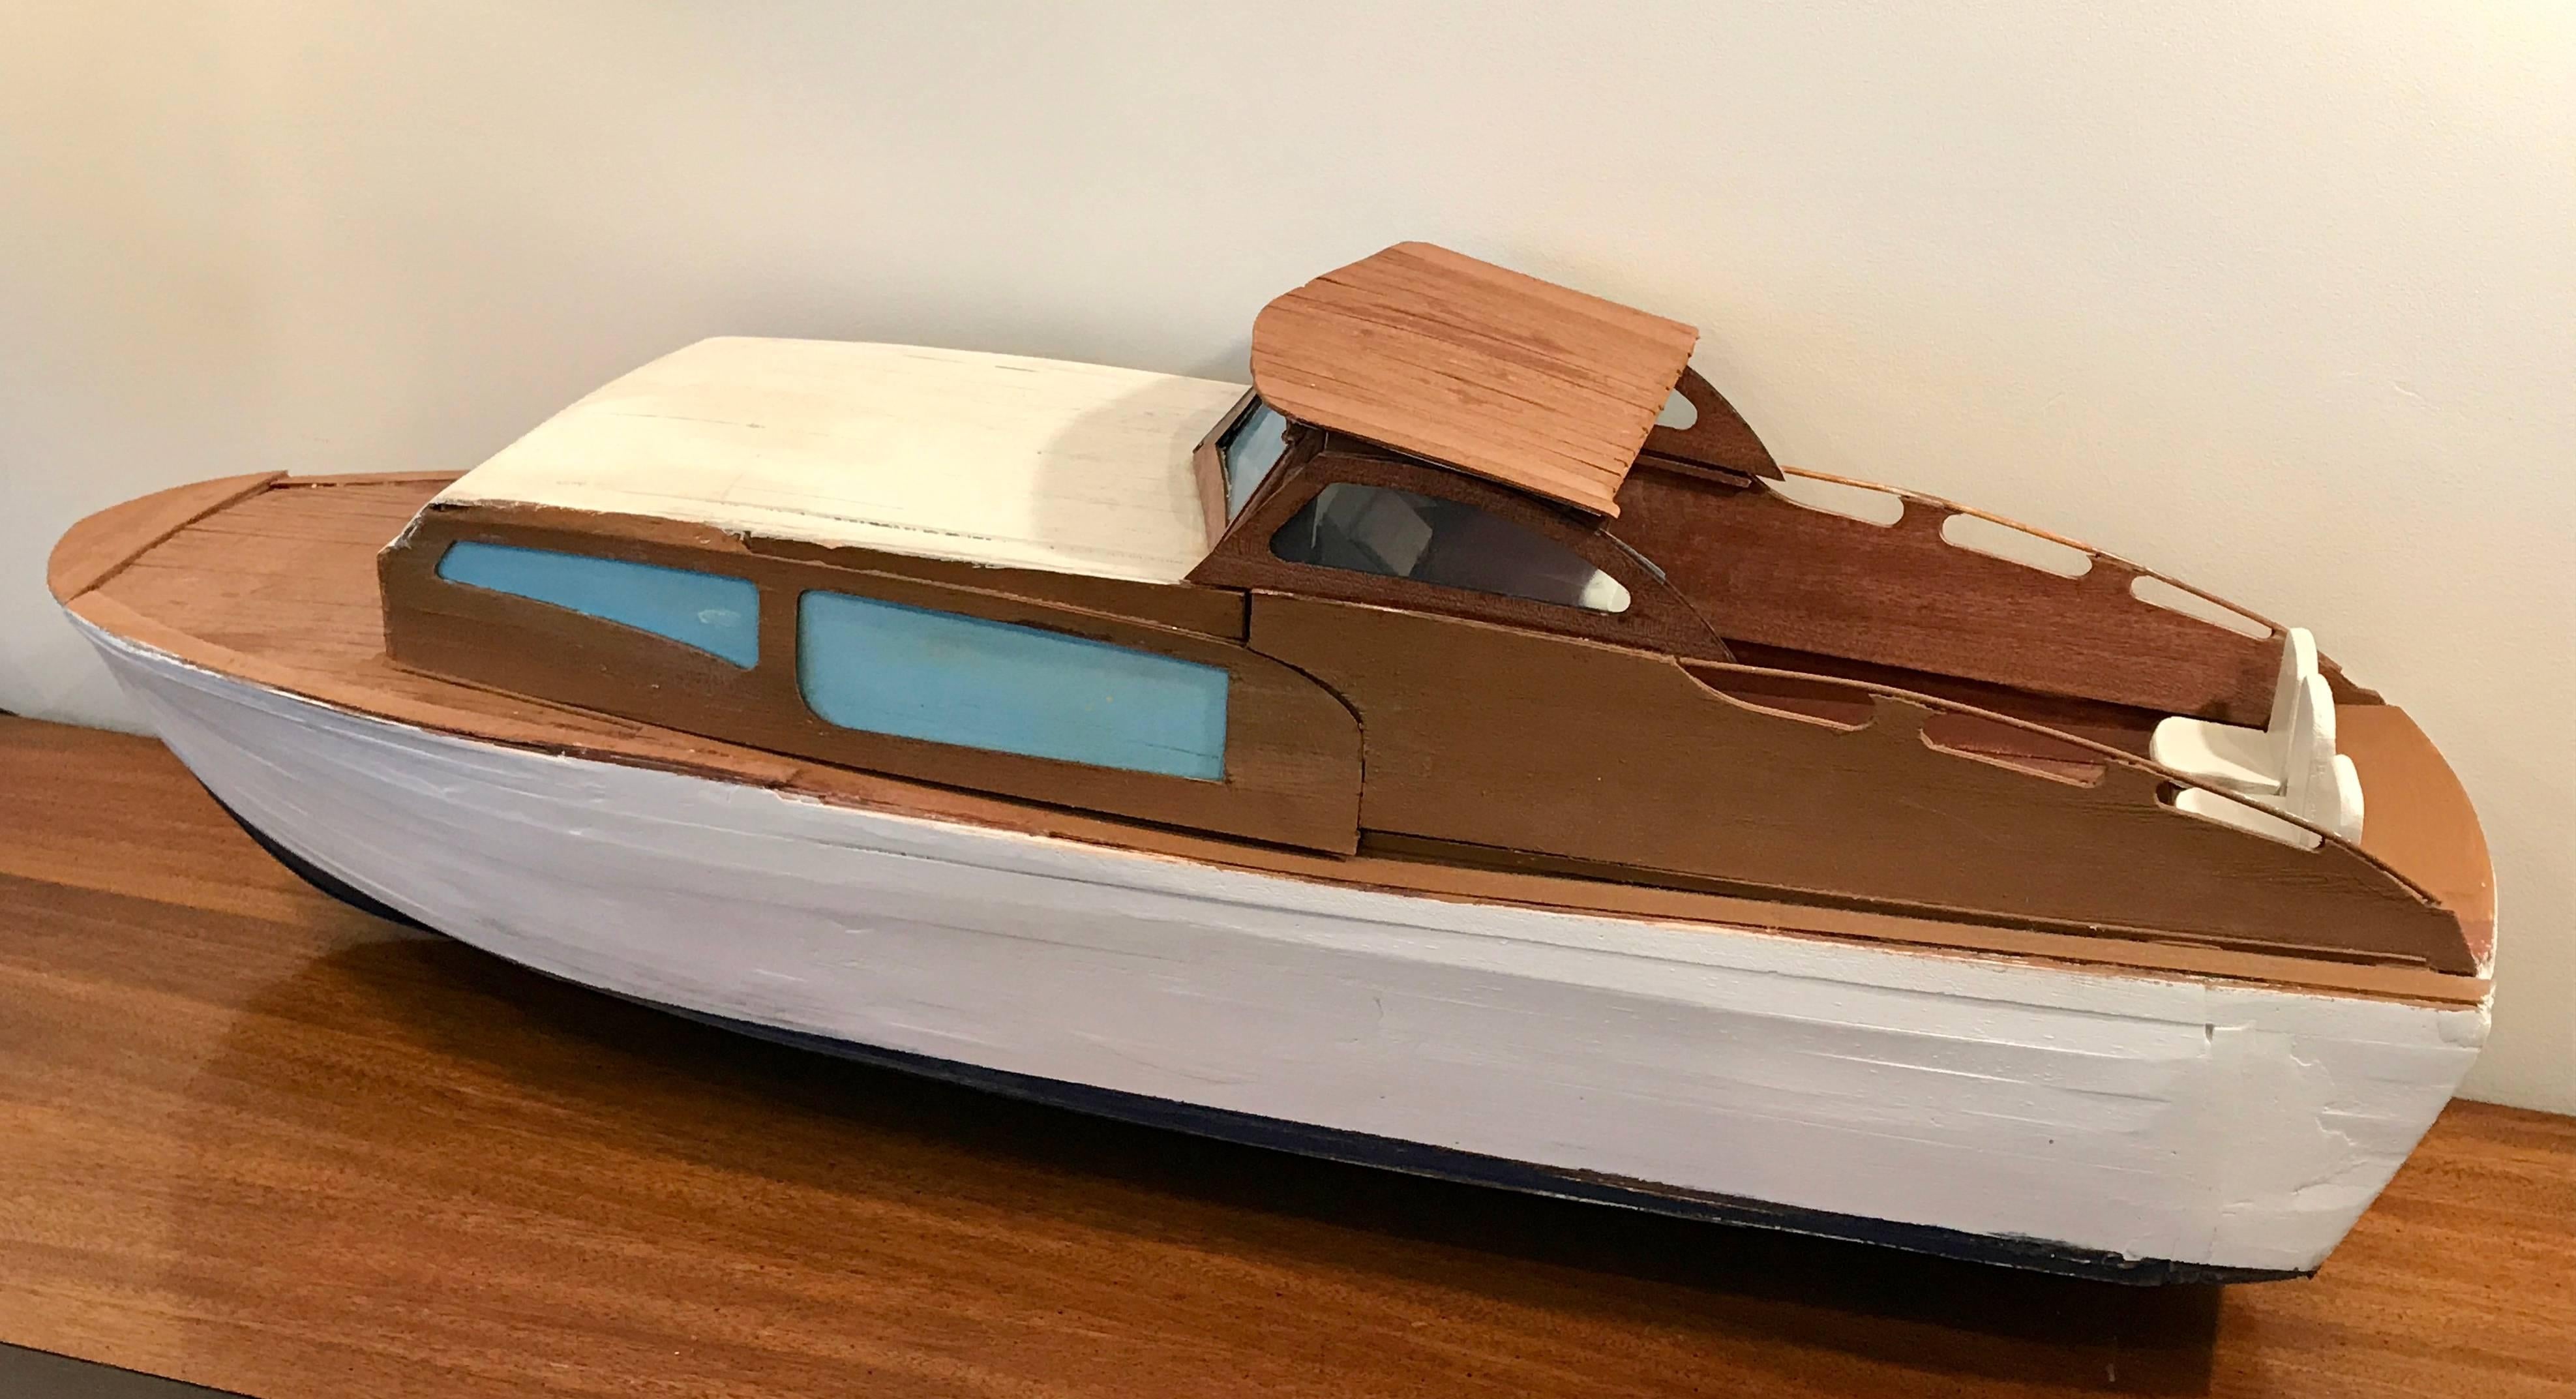 Very cool wooden Cabin Cruiser folk art sculpture. Nautical. Handmade. Great size at 36 inches x 12 inches.